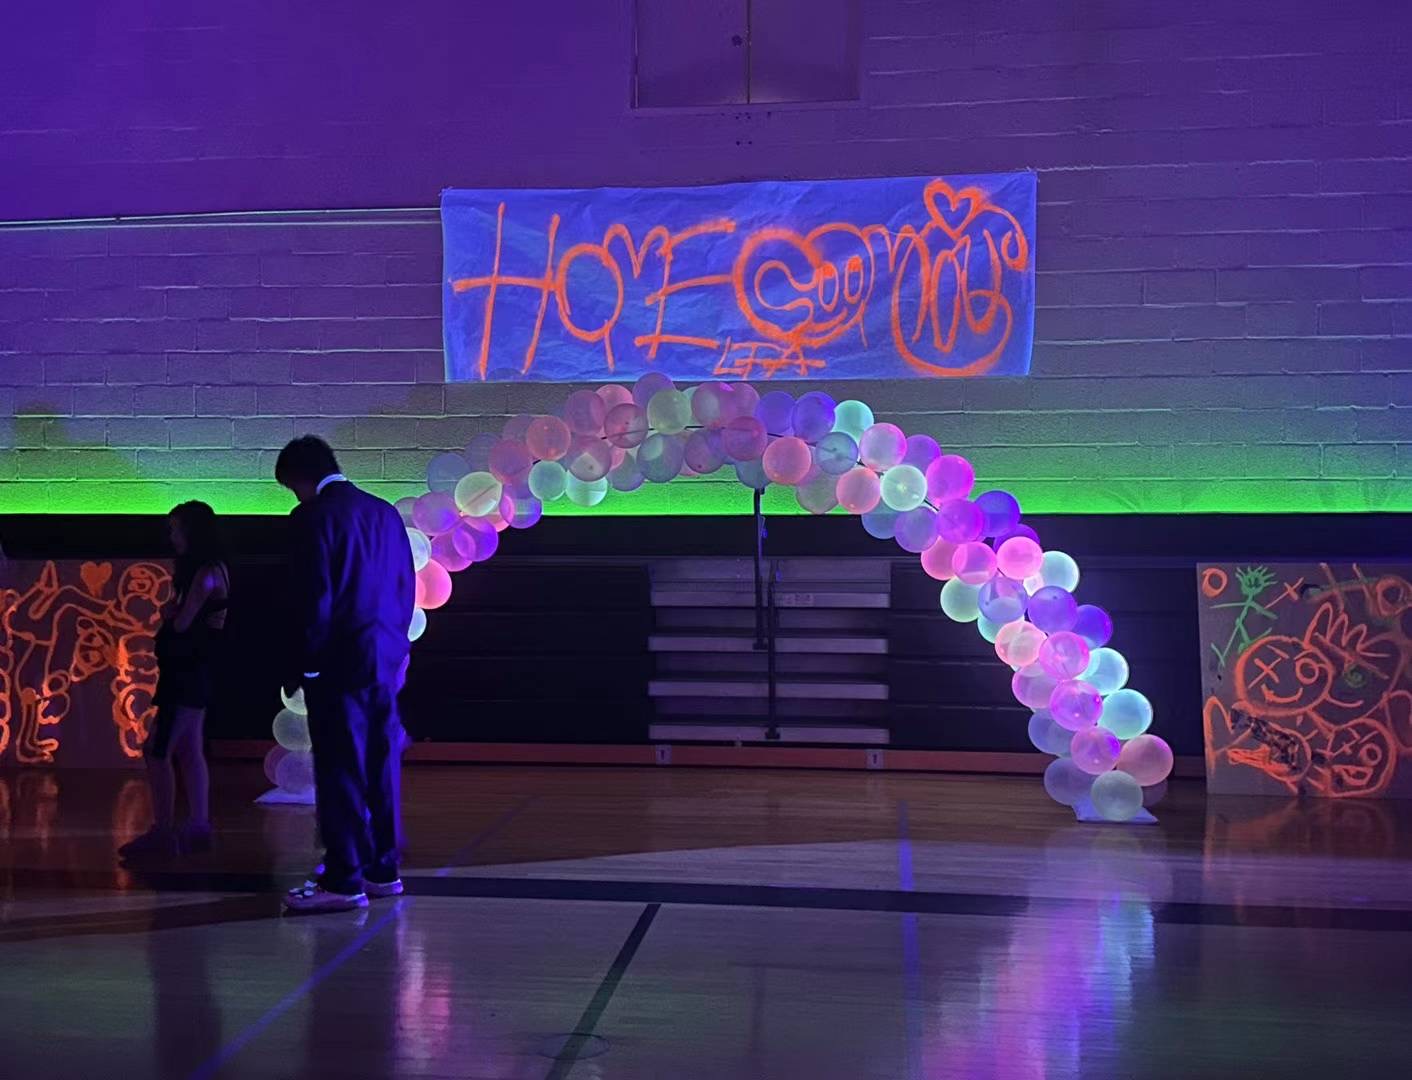 Glow in the dark decorations adorn Homecoming to match the theme.